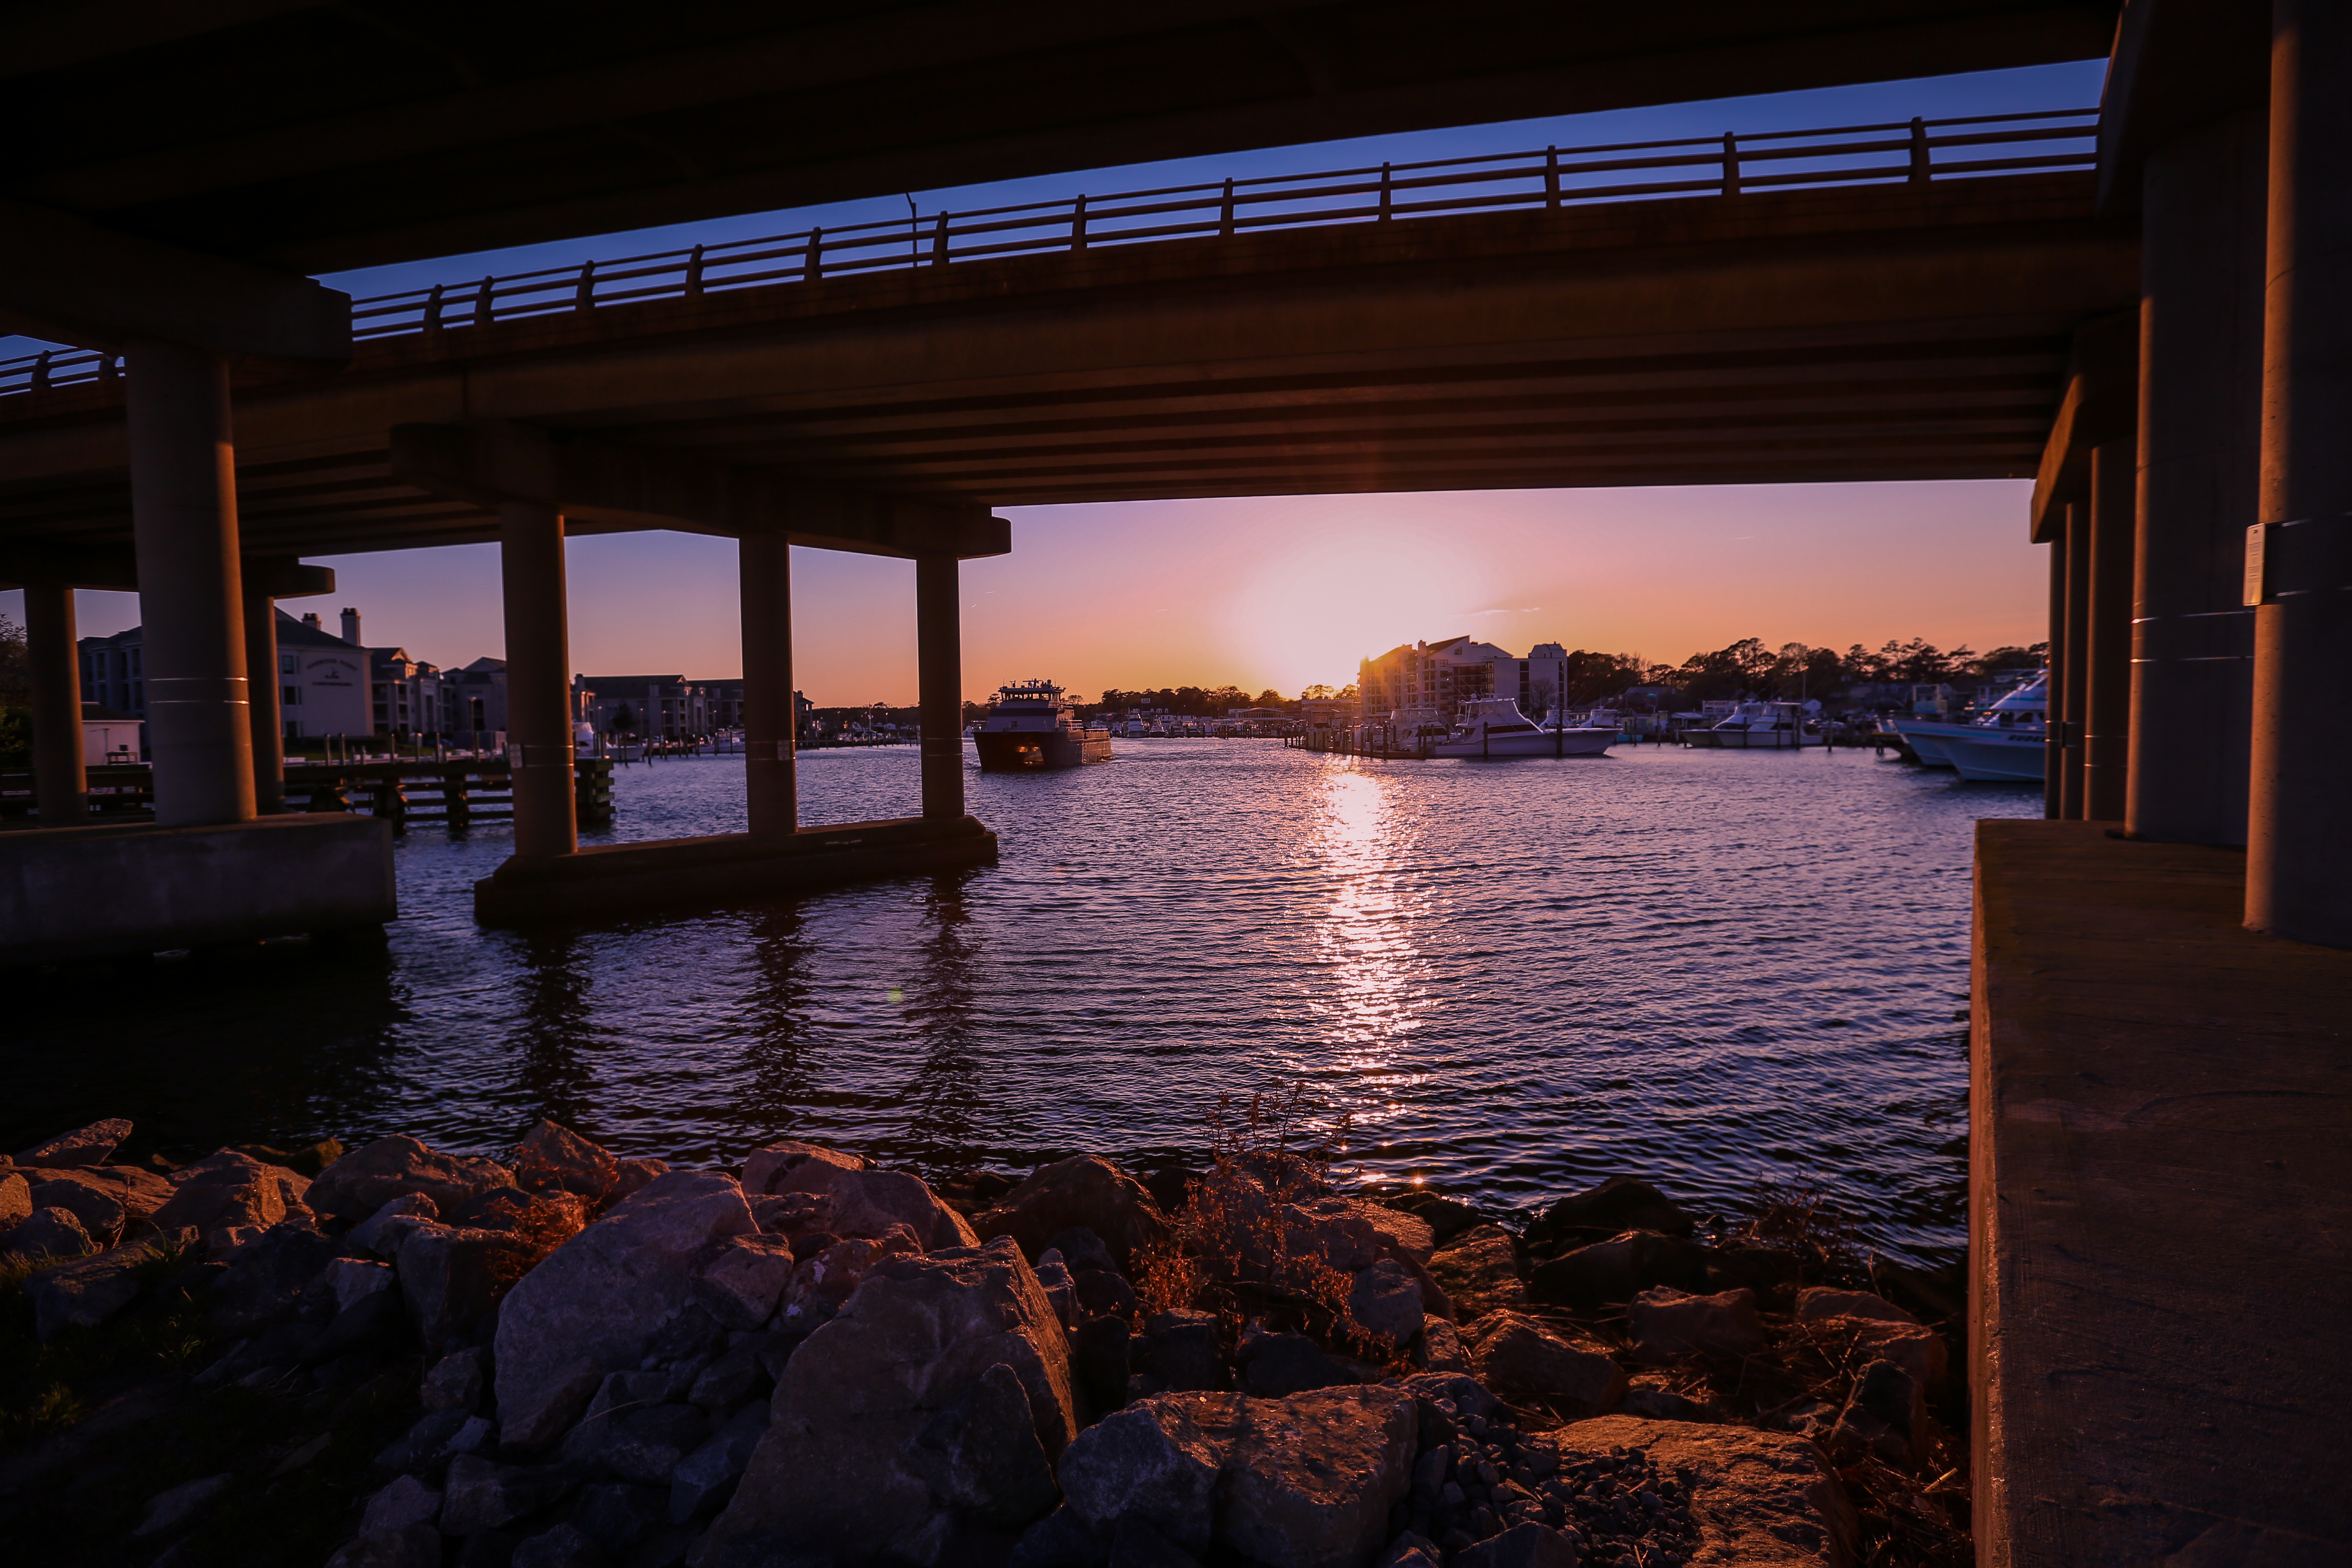 The Rudee Inlet at Sunset